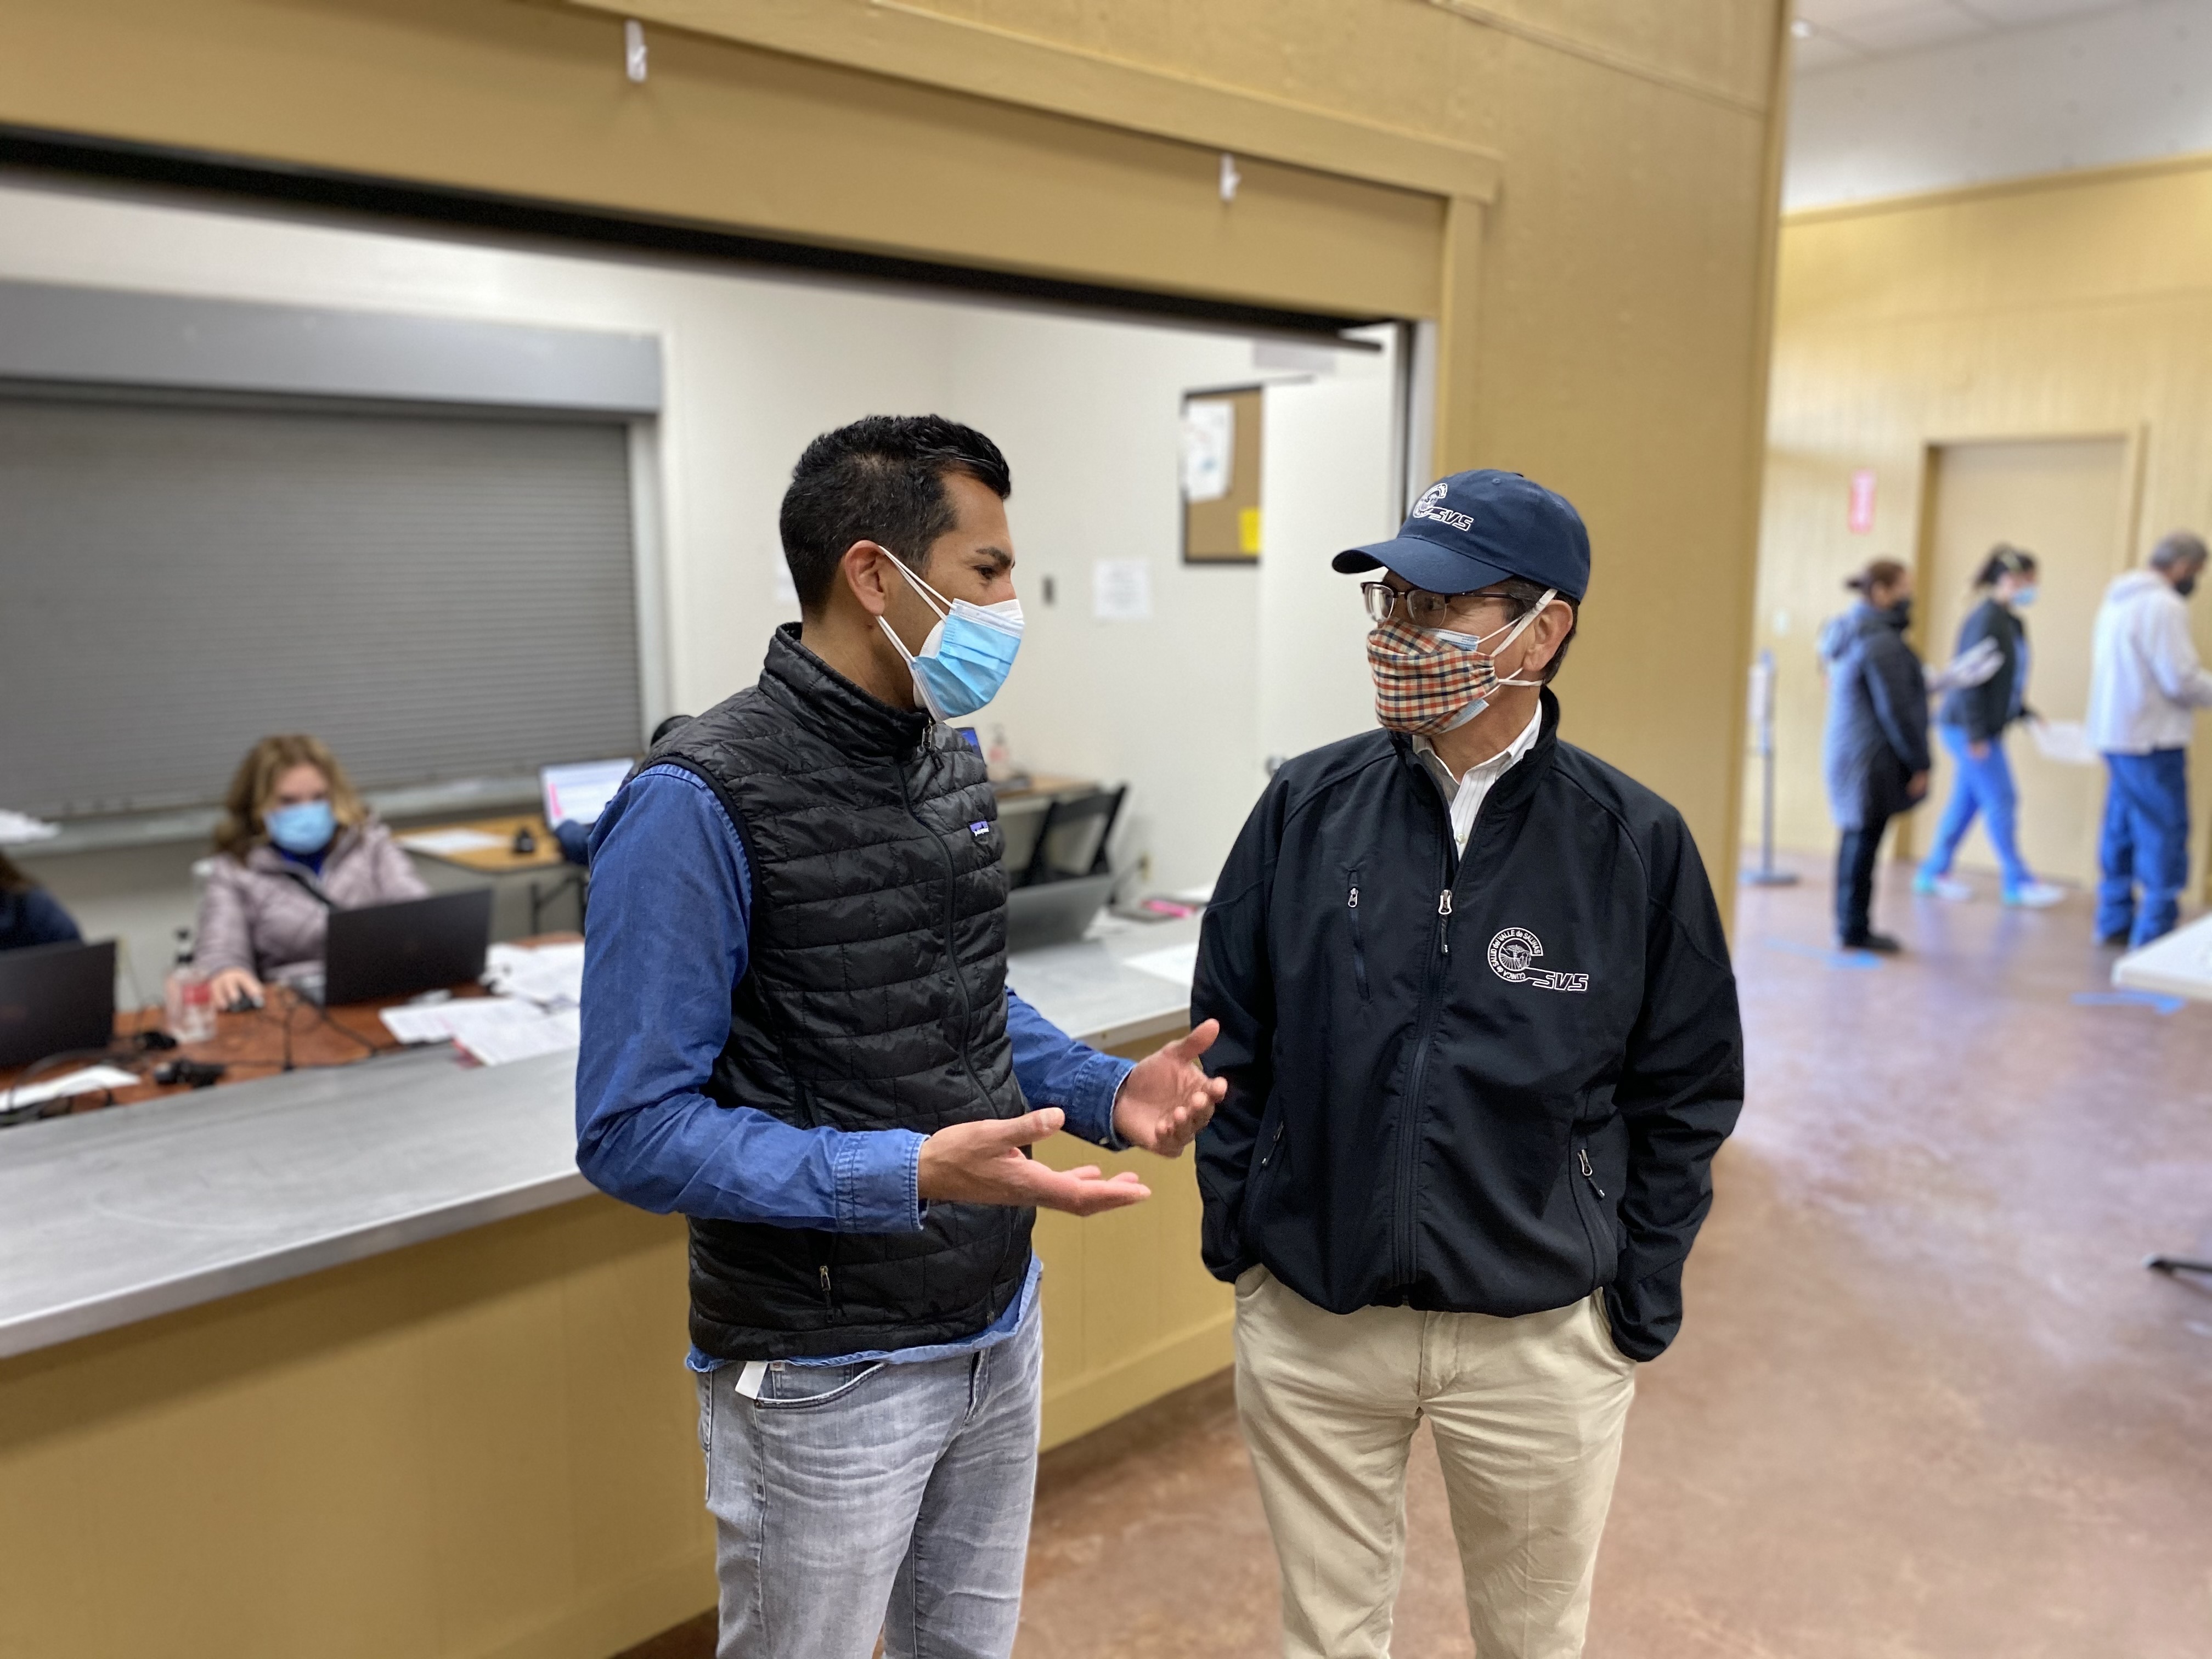 (2020) Asm. Robert Rivas in a mask standing next to another individual in a mask in a medical setting. 